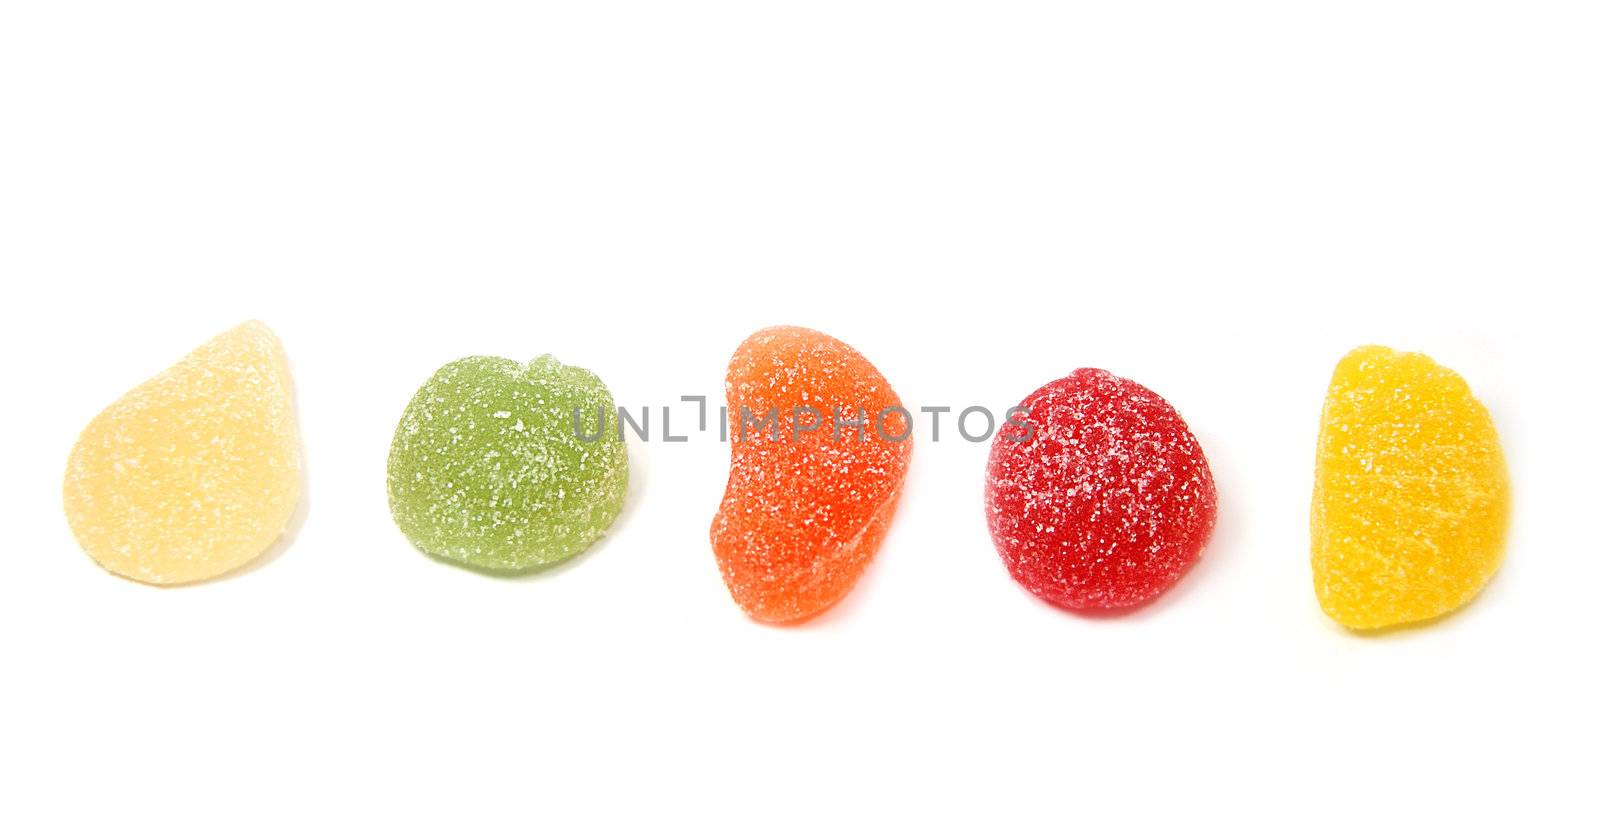 colorful marmalade candies on white